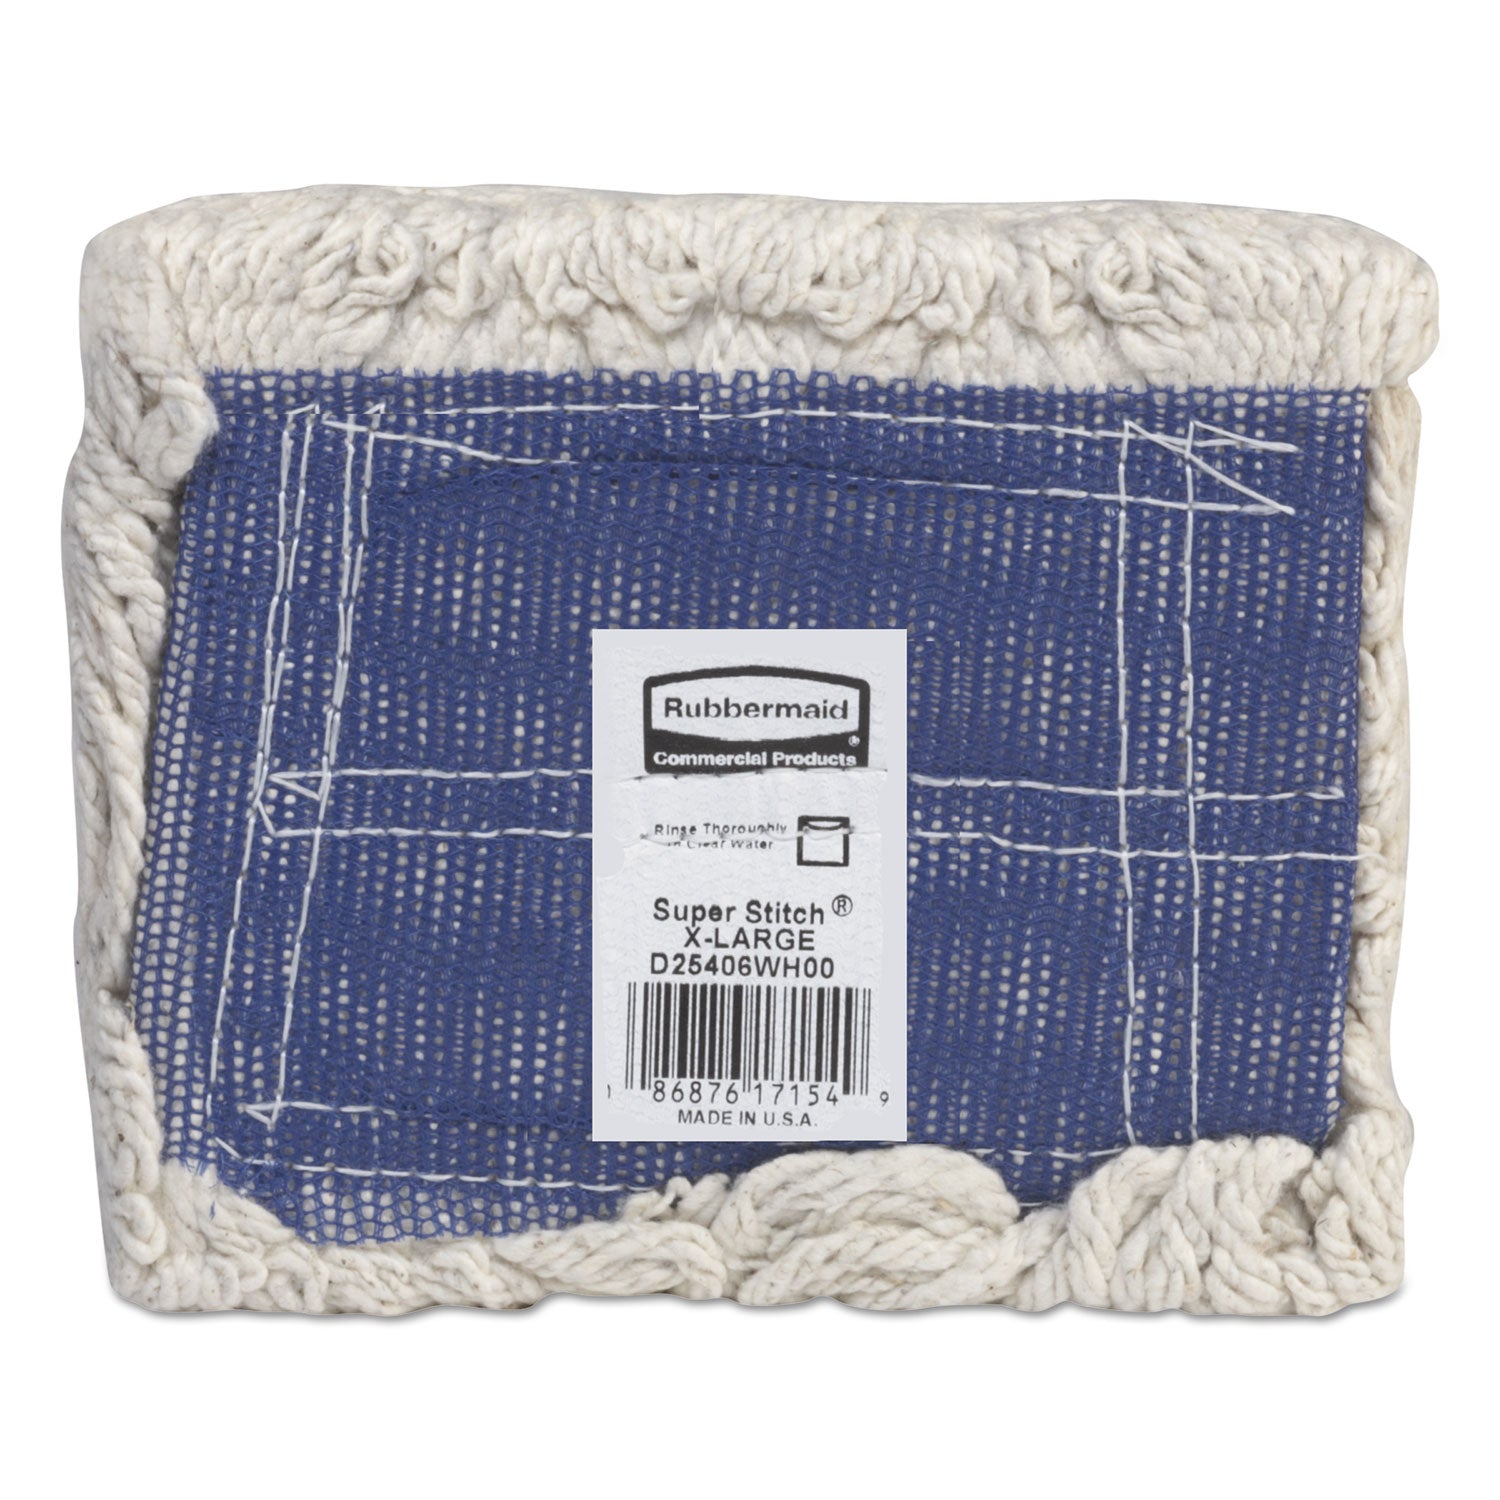 super-stitch-blend-mop-cotton-synthetic-x-large-white-6-carton_rcpd25406whict - 2